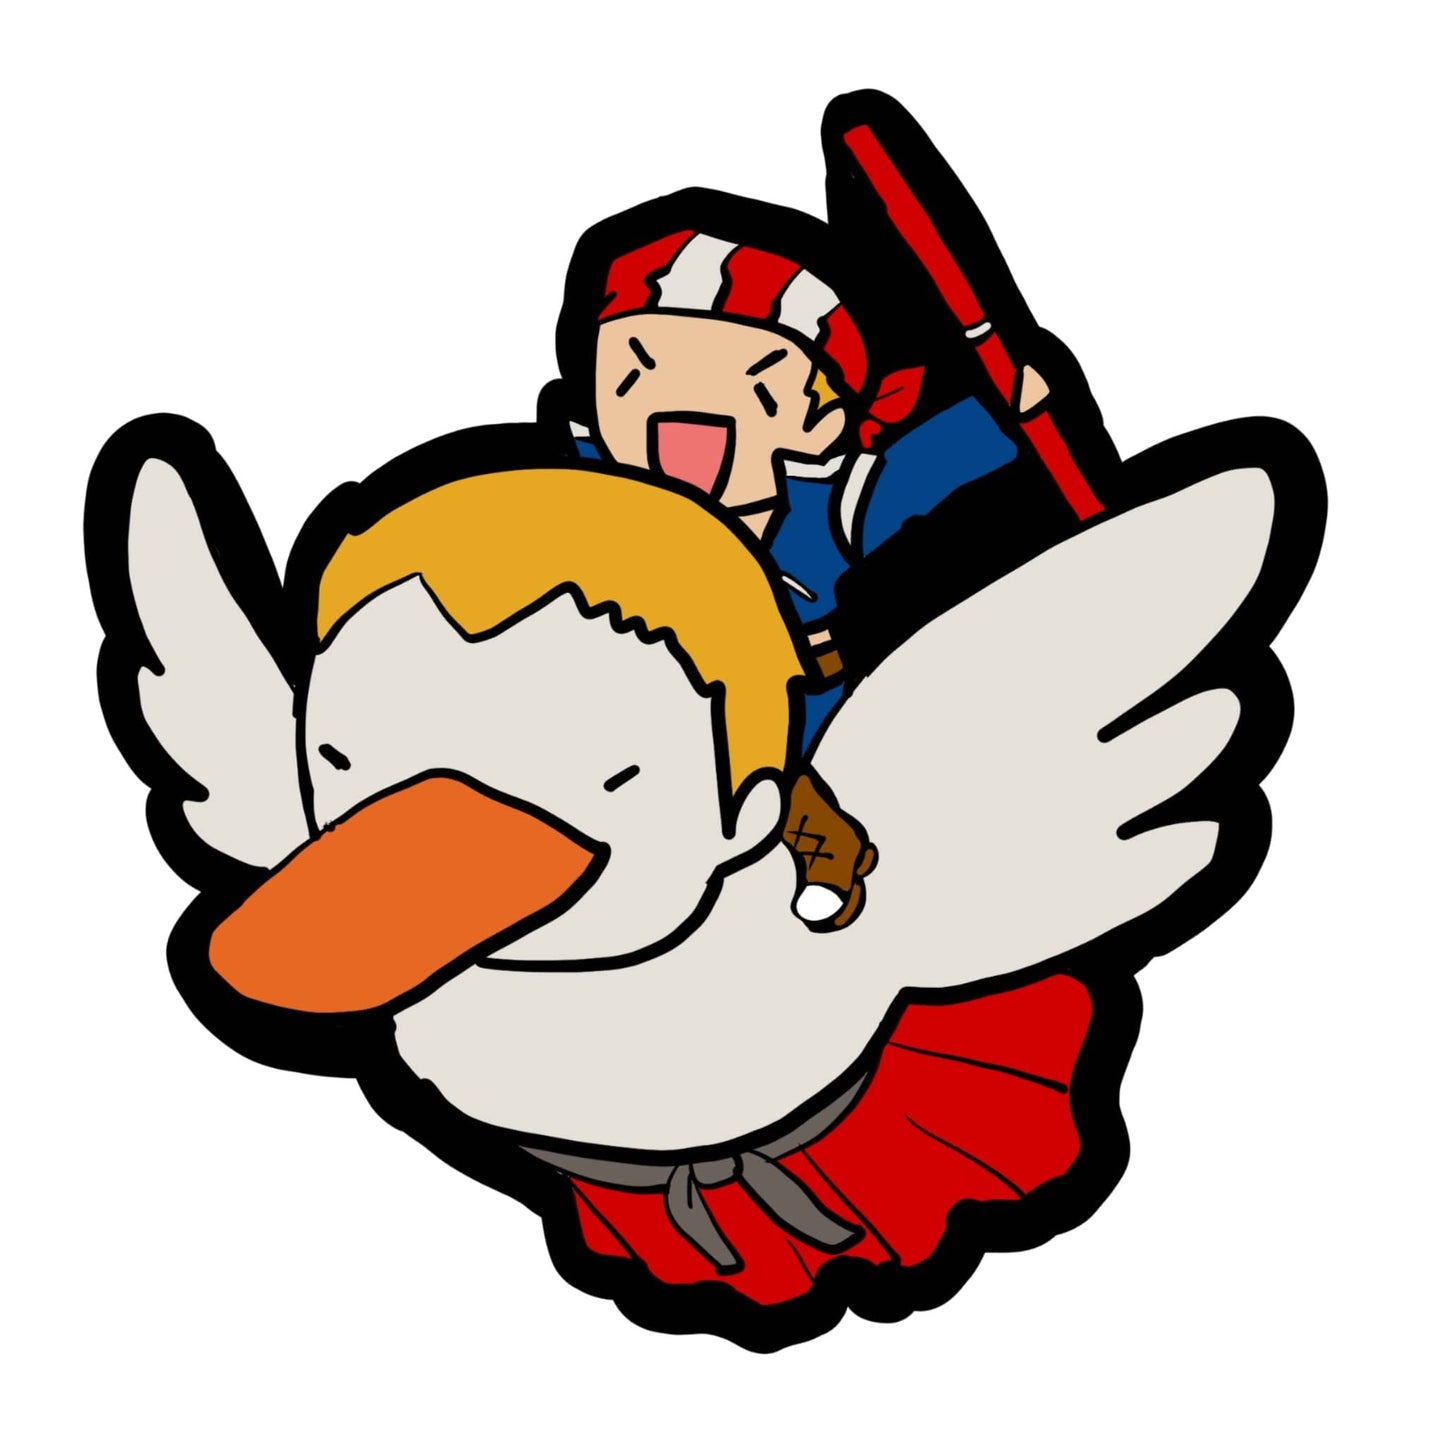 Geese Flying with Billy Sticker